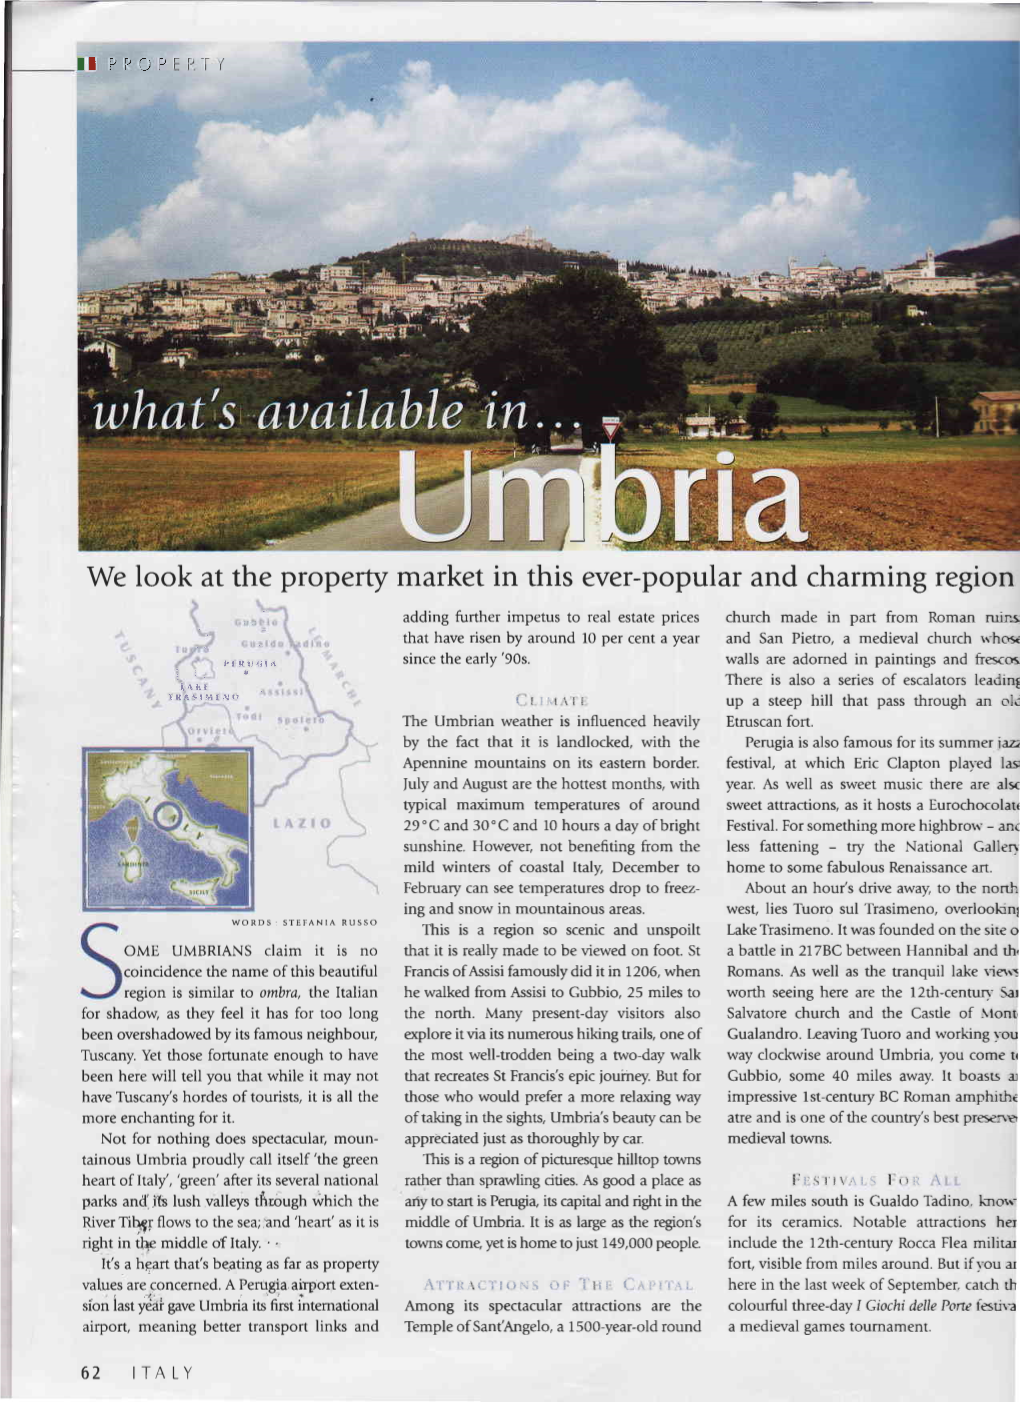 Italy Magazine Issue 56: What's Available in Umbria